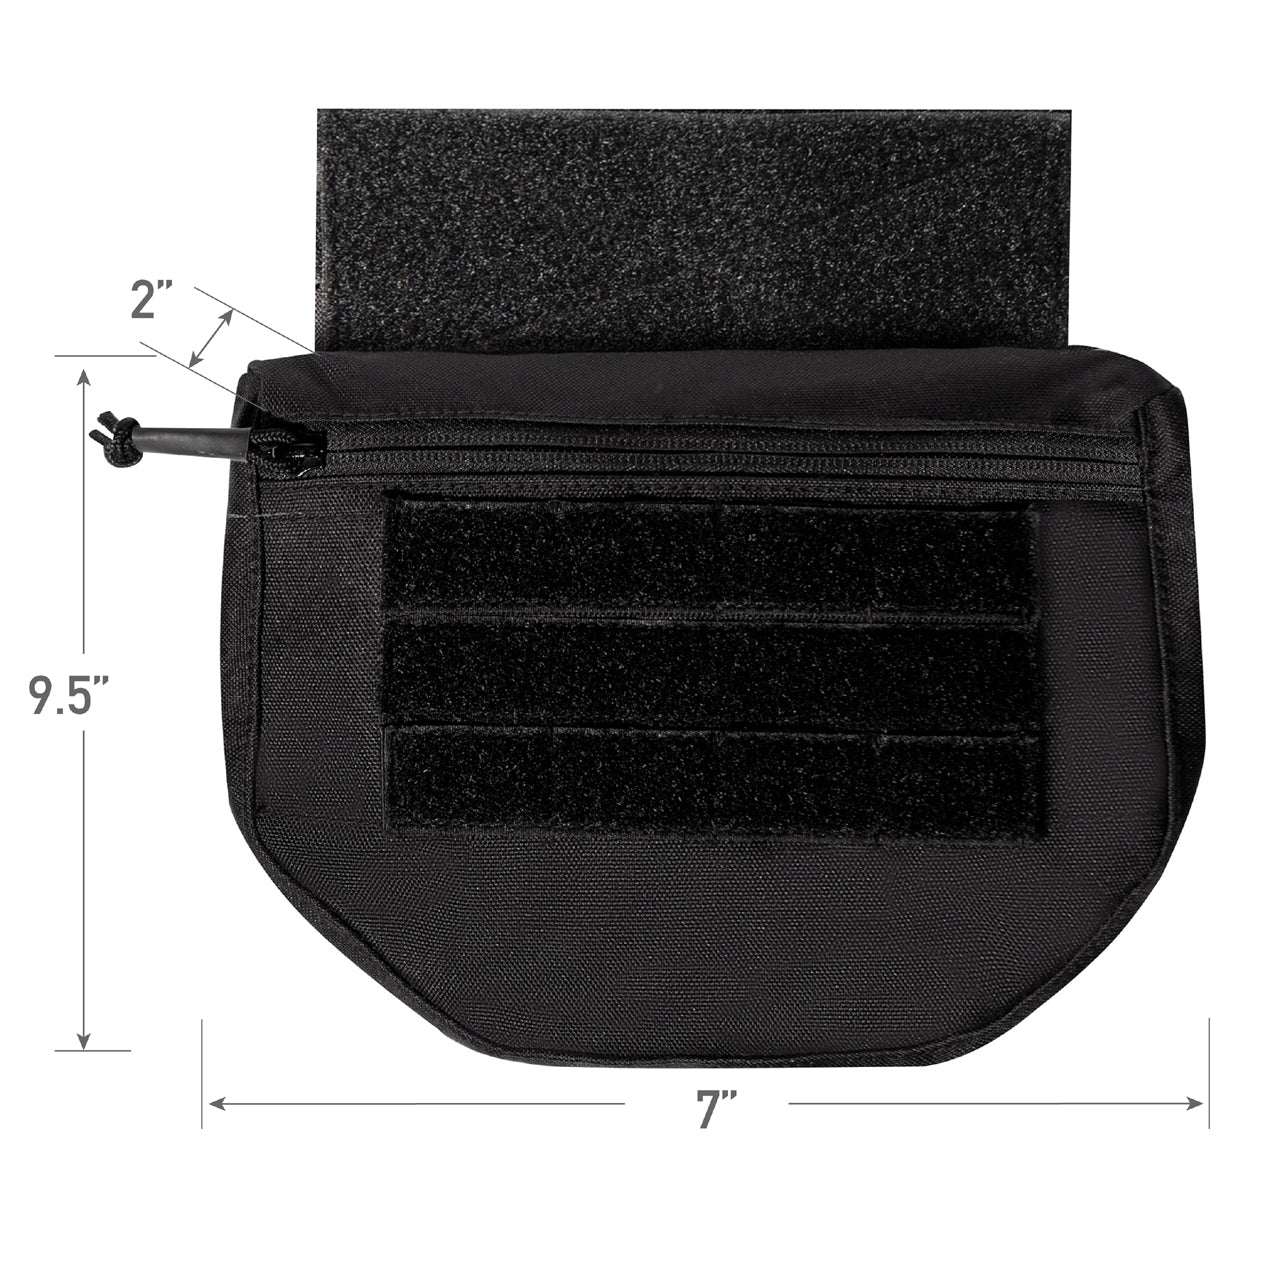 Tactical Pouch Is Designed To Integrate Under The Front Flap Of Most Plate Carrier Vests, Attaching Quickly And Securely Via A Hook And Loop Fastening System Interior Of This Modular Lightweight Load-Carrying Equipment Accessory Features A Row Of Elastic Loops, Perfect For Storing Magazines As Well As A Large Loop Field www.moralepatches.com.au